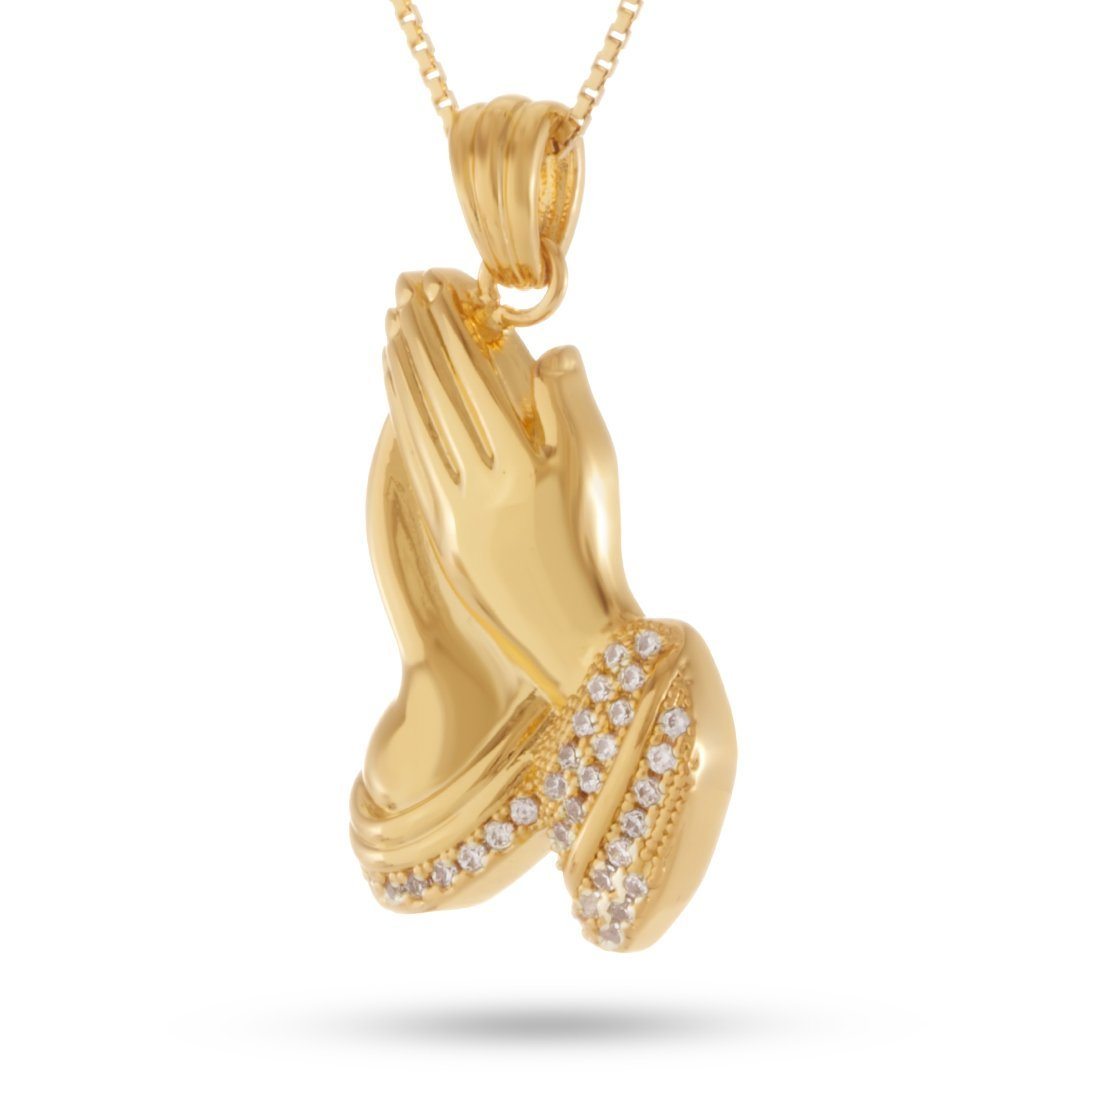 The 14K Gold Micro Praying Hands Necklace